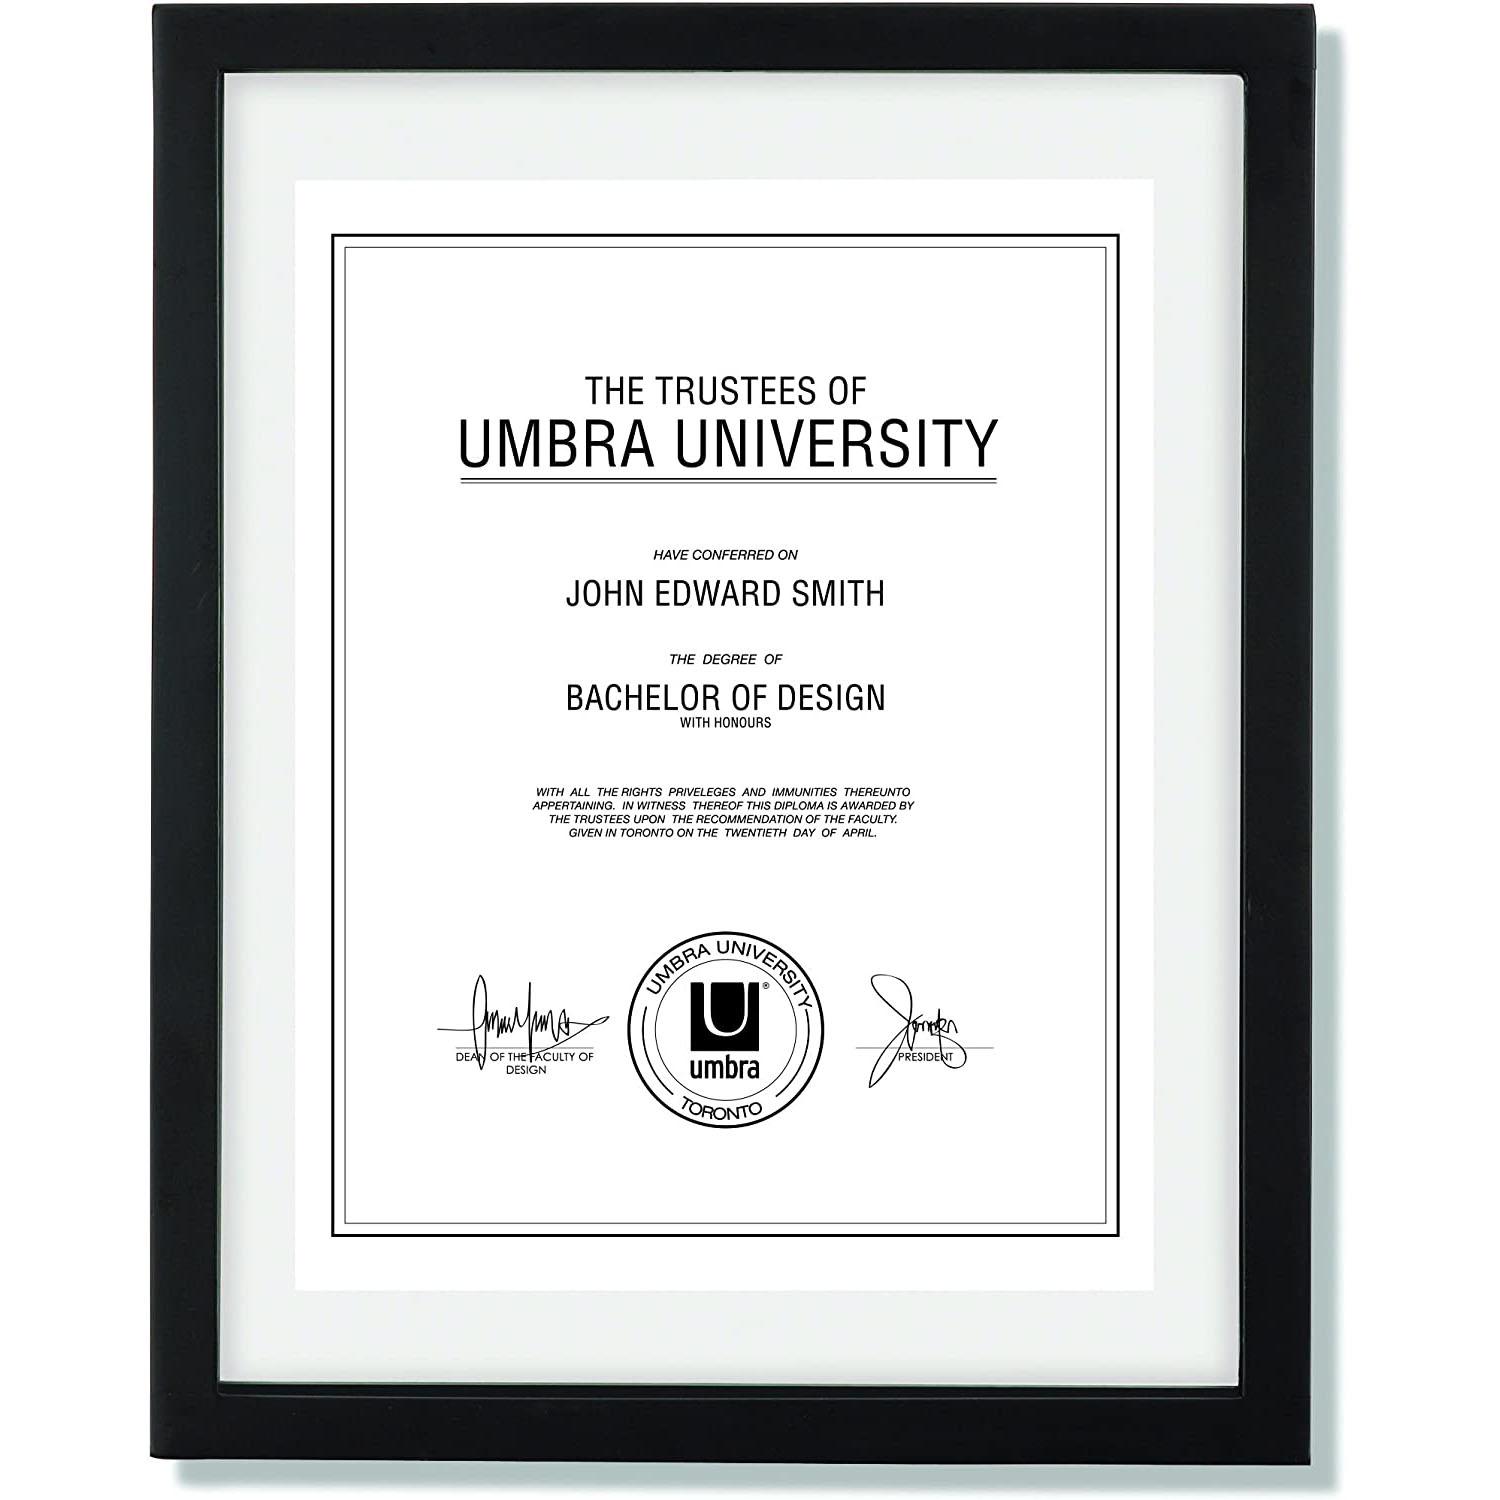 Umbra Floating 11x14 Picture Frame for $5.33